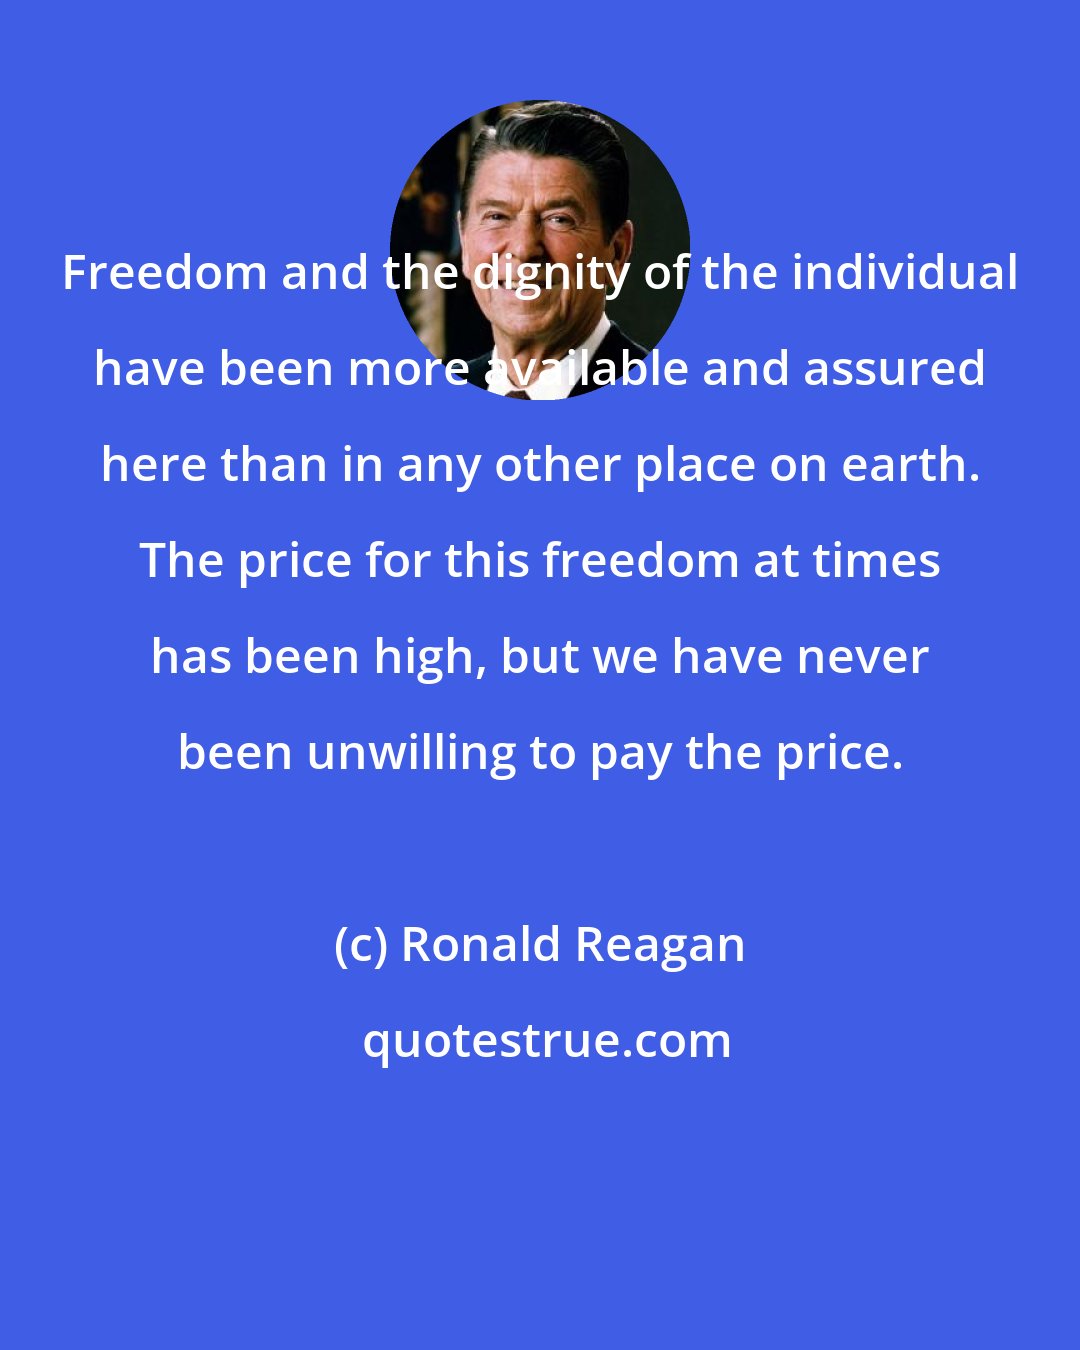 Ronald Reagan: Freedom and the dignity of the individual have been more available and assured here than in any other place on earth. The price for this freedom at times has been high, but we have never been unwilling to pay the price.